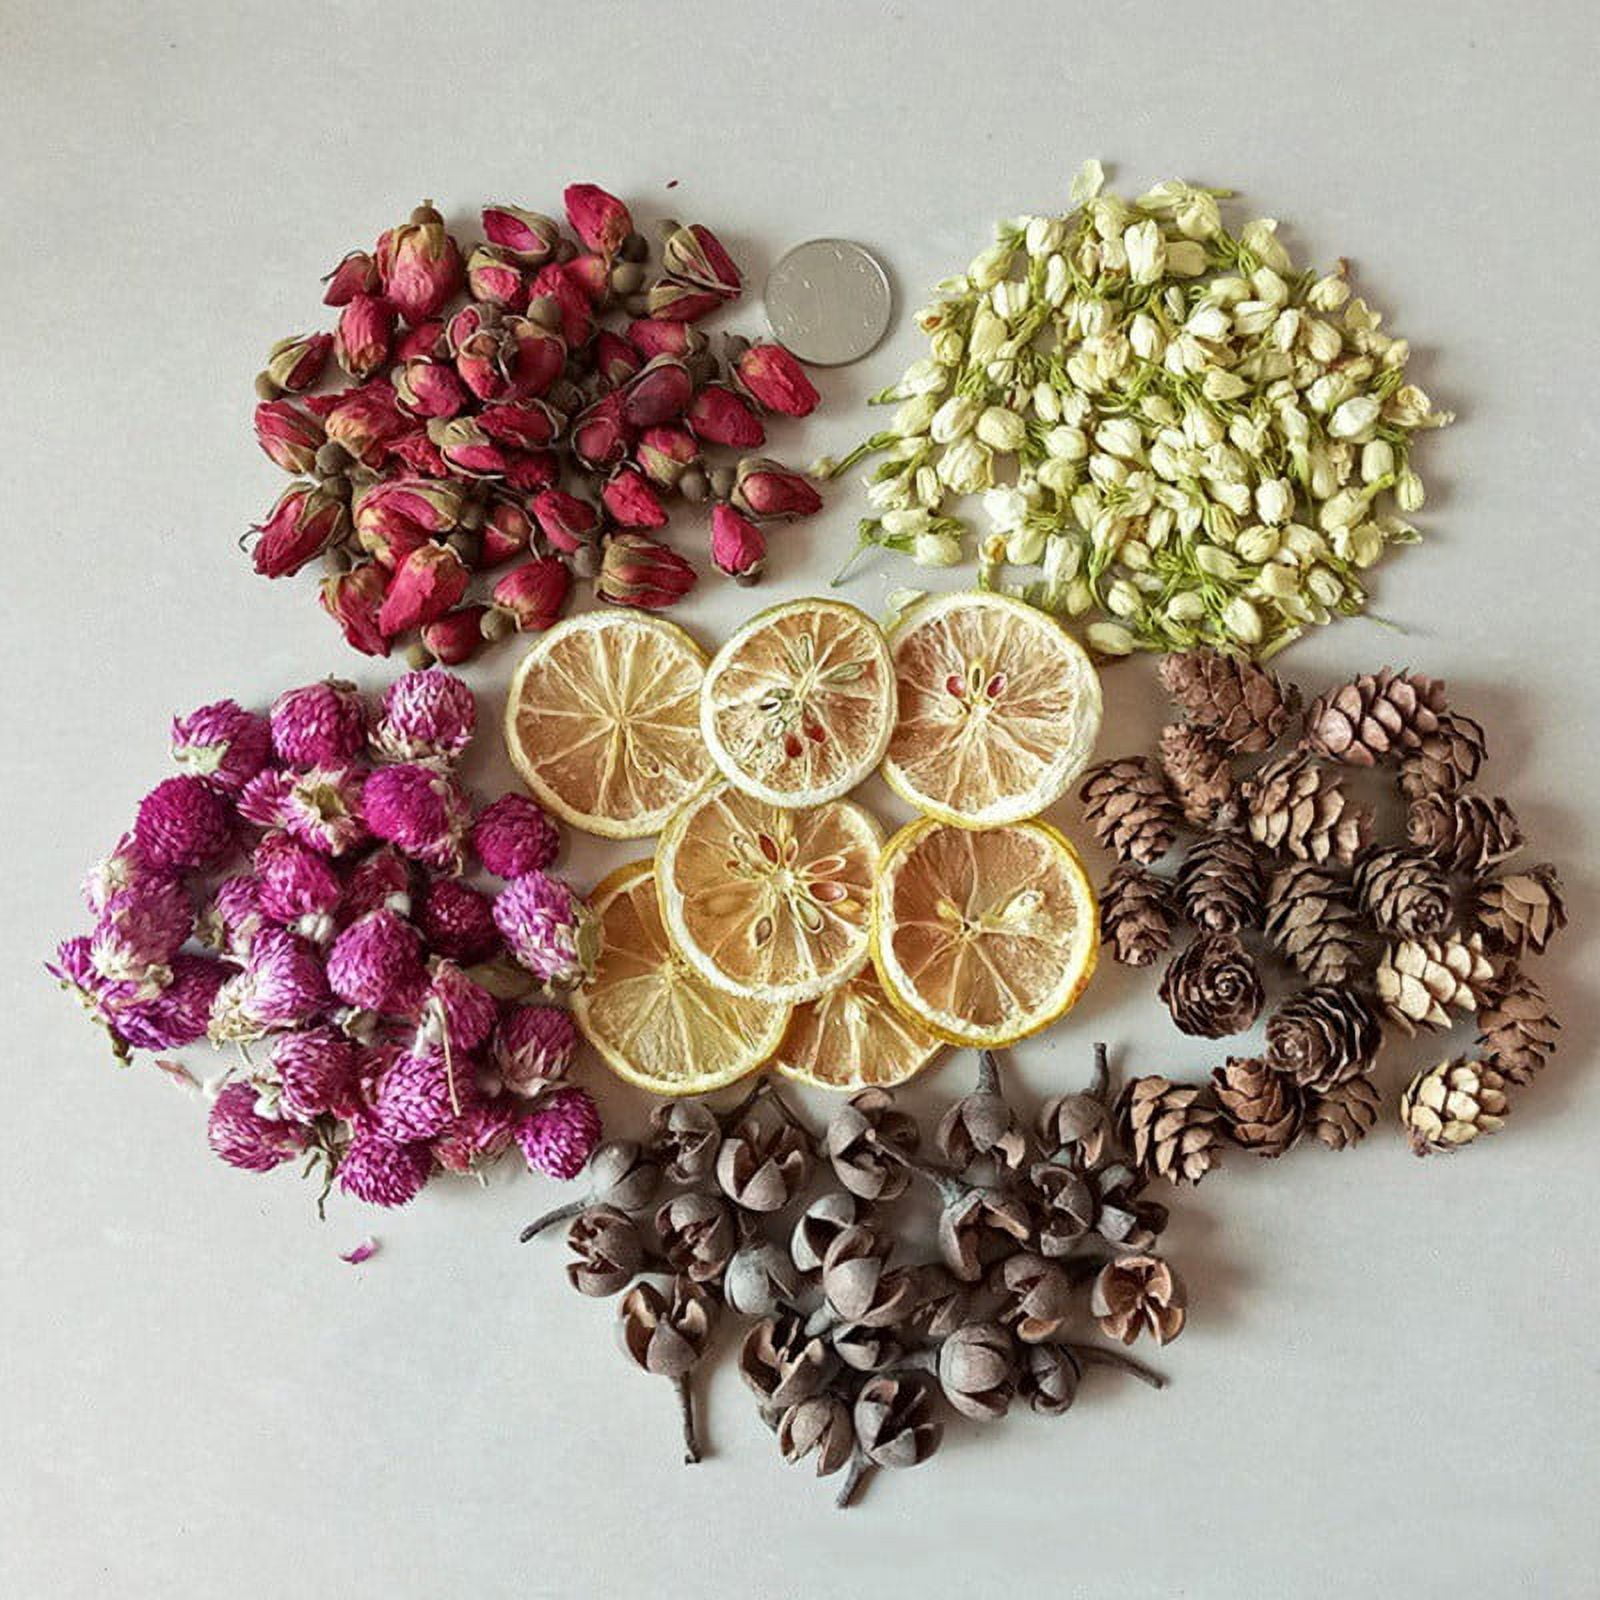 Dried Flowers for Resin Colorful Dried Flowers for Candle Making Resin  Supplies